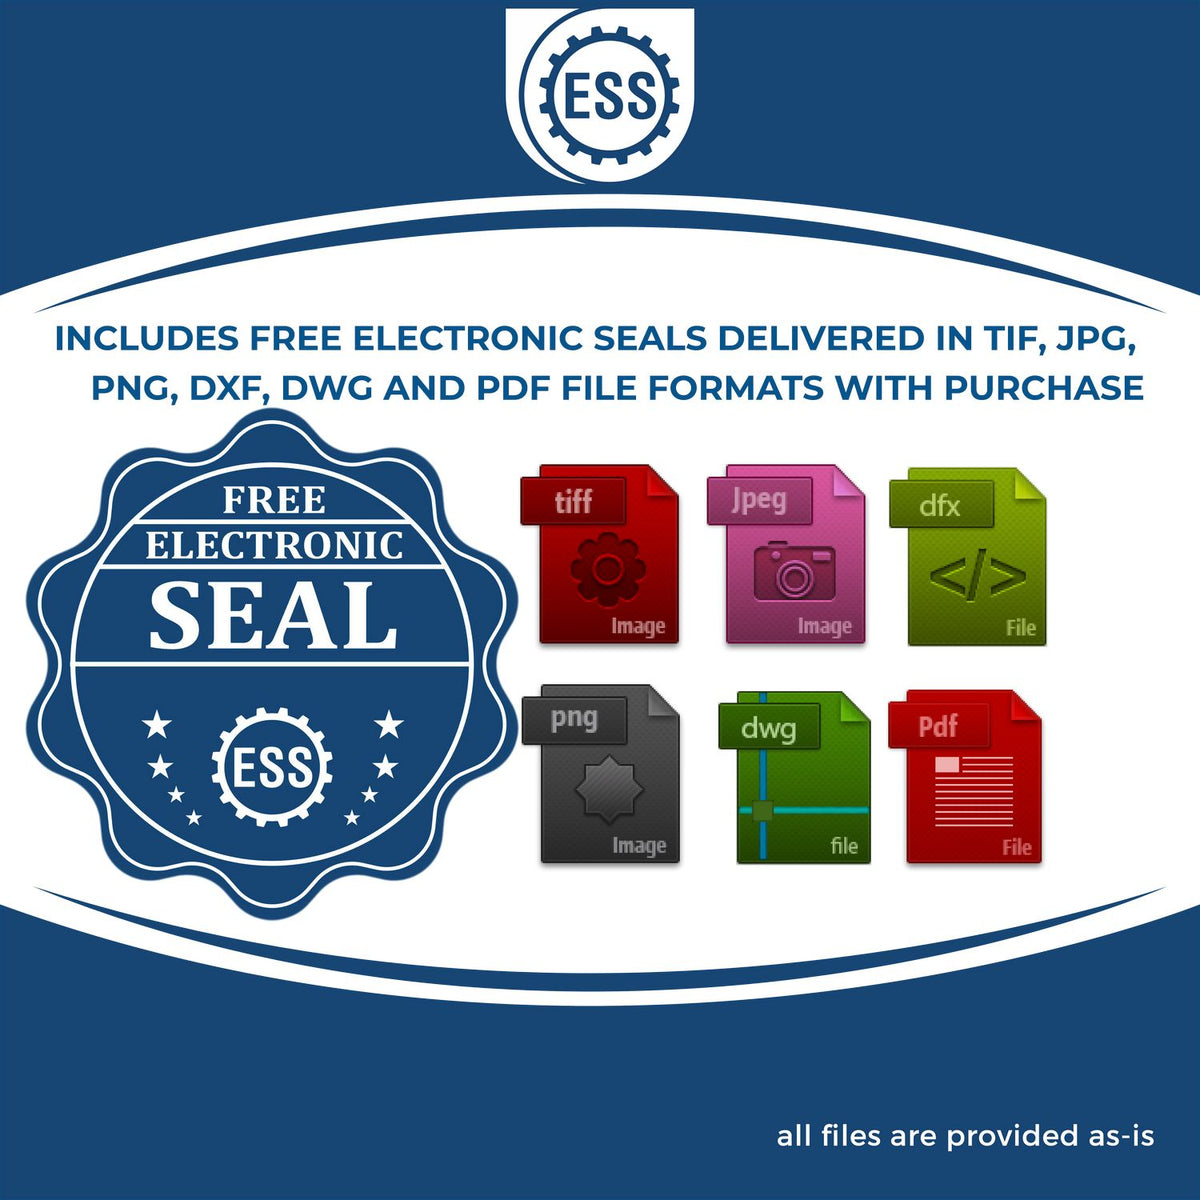 An infographic for the free electronic seal for the Extended Long Reach Tennessee Architect Seal Embosser illustrating the different file type icons such as DXF, DWG, TIF, JPG and PNG.